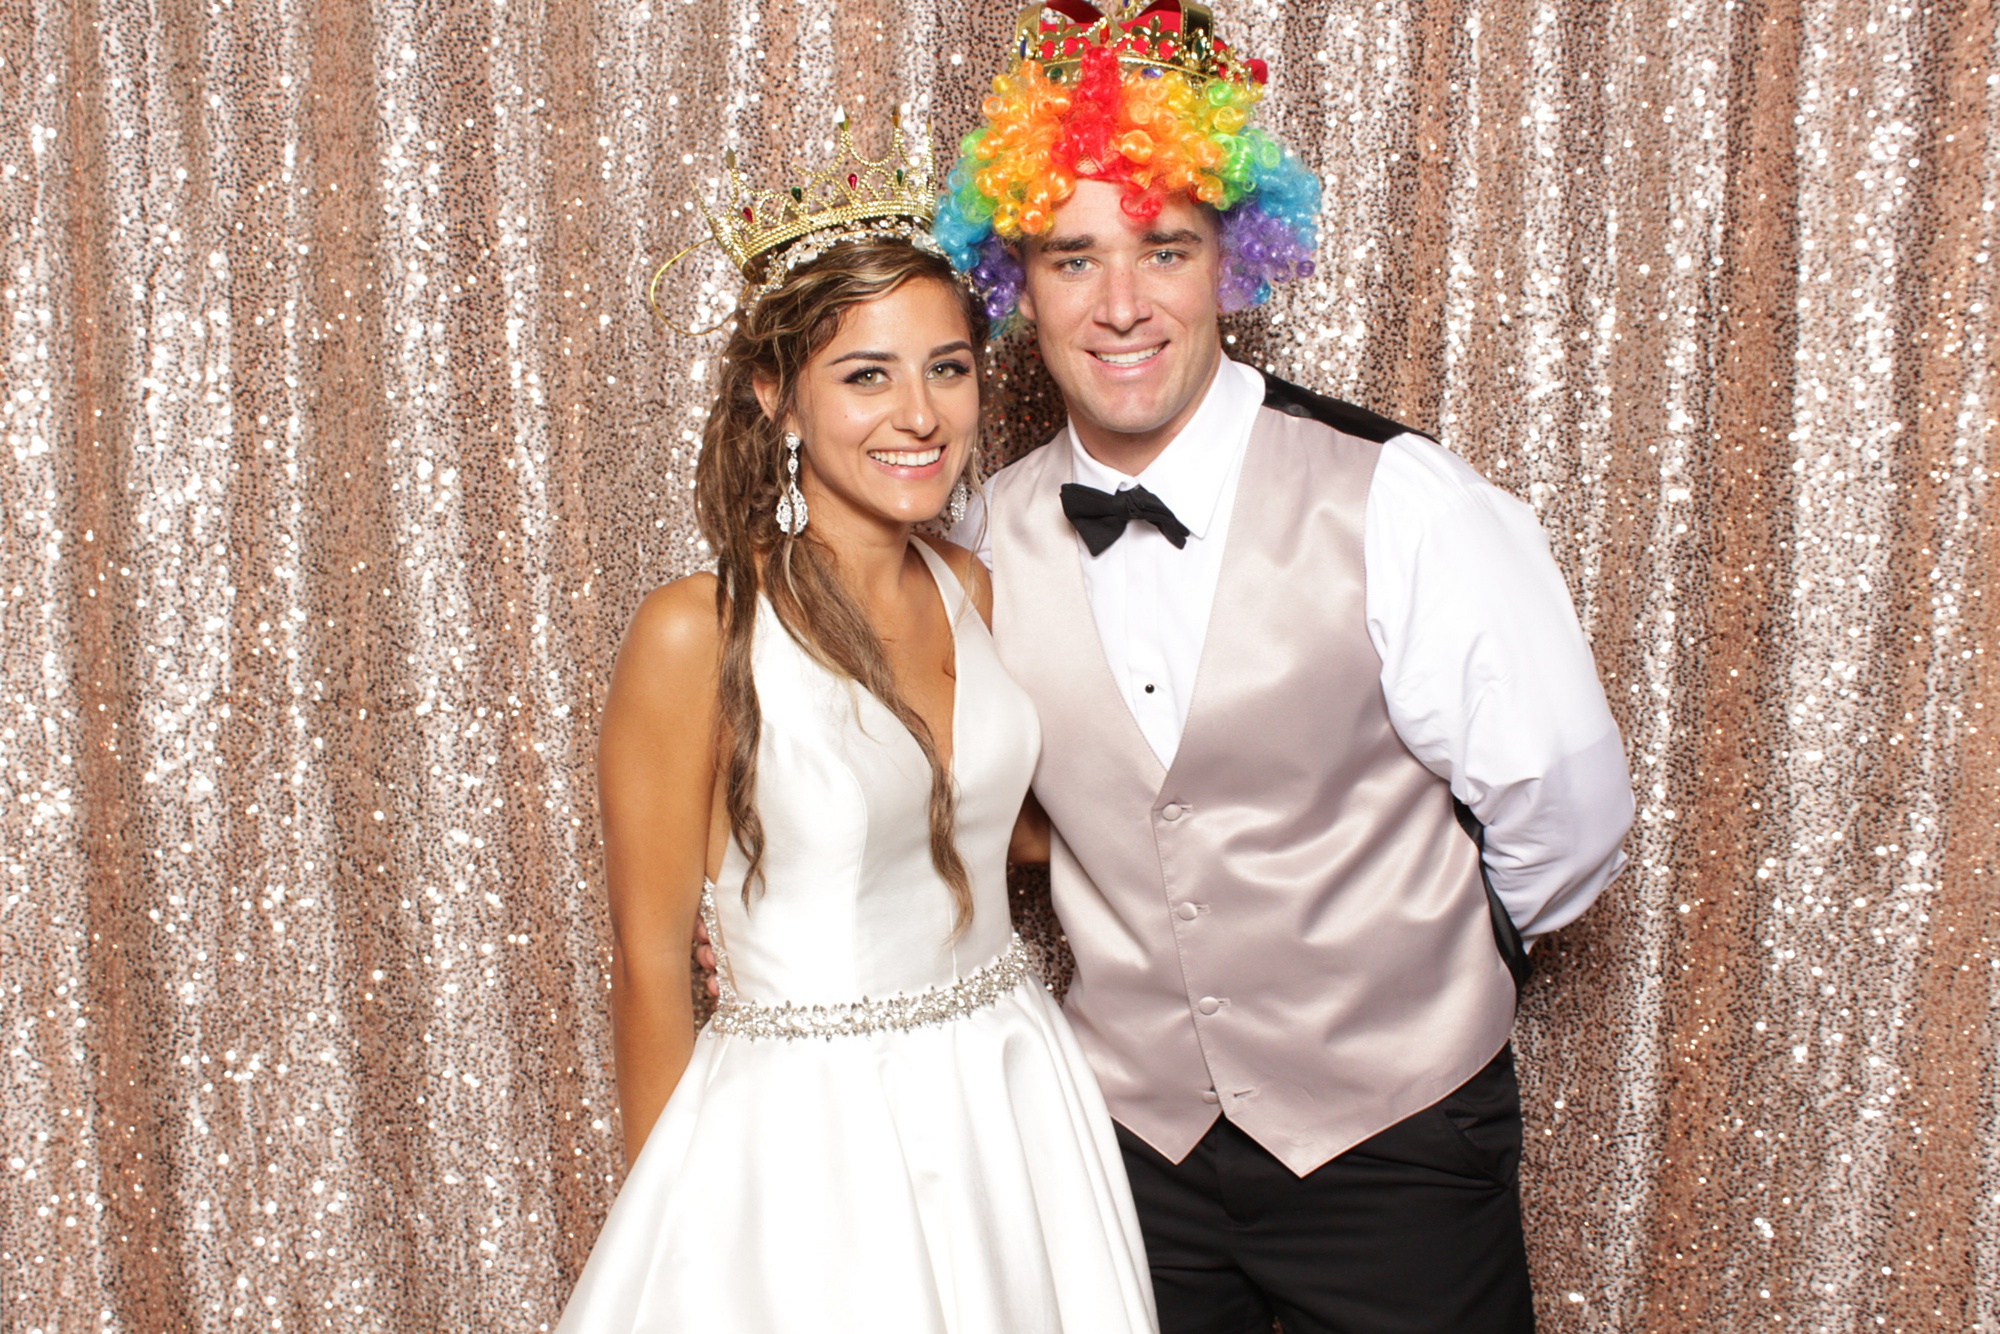 groom in clown wig poses with bride in photo booth